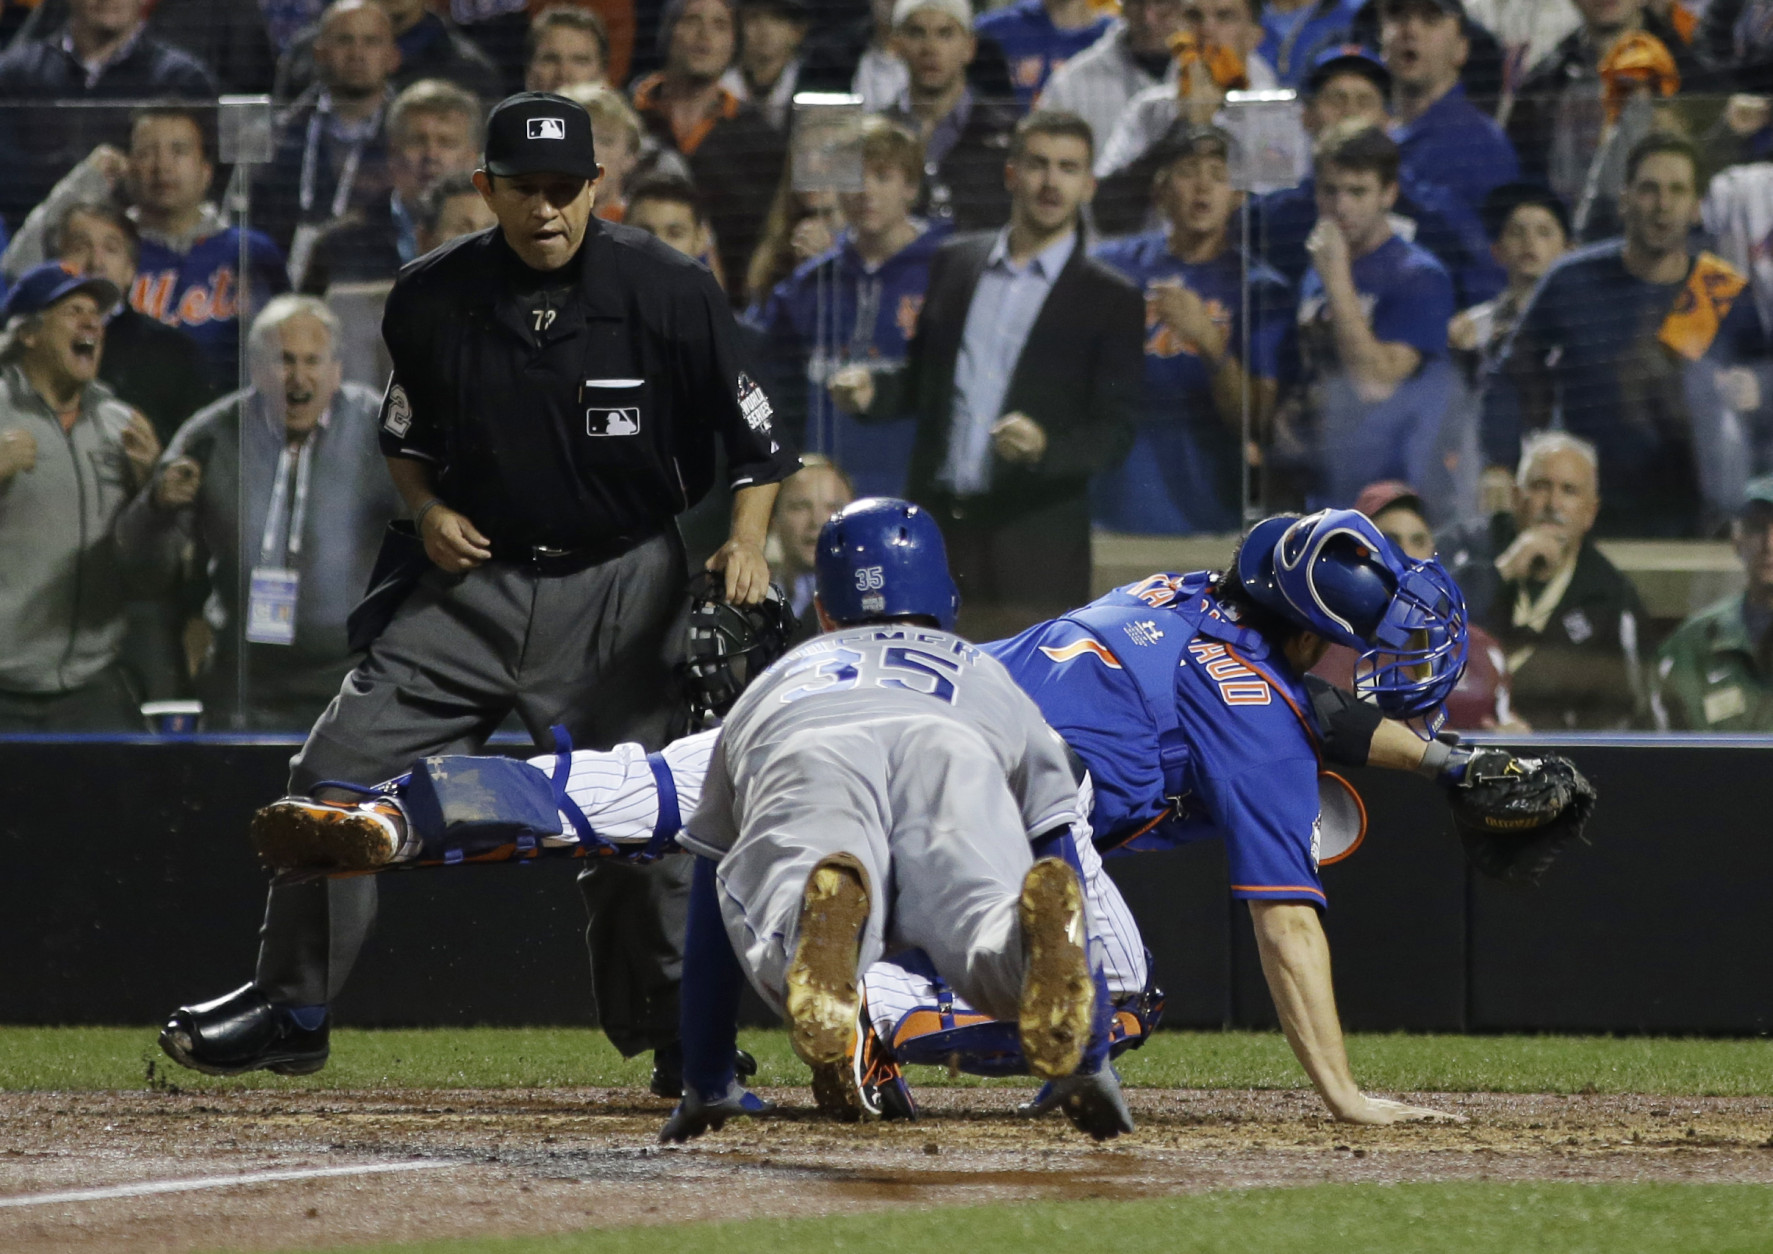 Home plate umpire Alfonso Marquez watches as Kansas City Royals' Eric Hosmer dives to score past New York Mets catcher Travis d'Arnaud during the ninth inning of Game 5 of the Major League Baseball World Series Sunday, Nov. 1, 2015, in New York. (AP Photo/Matt Slocum)